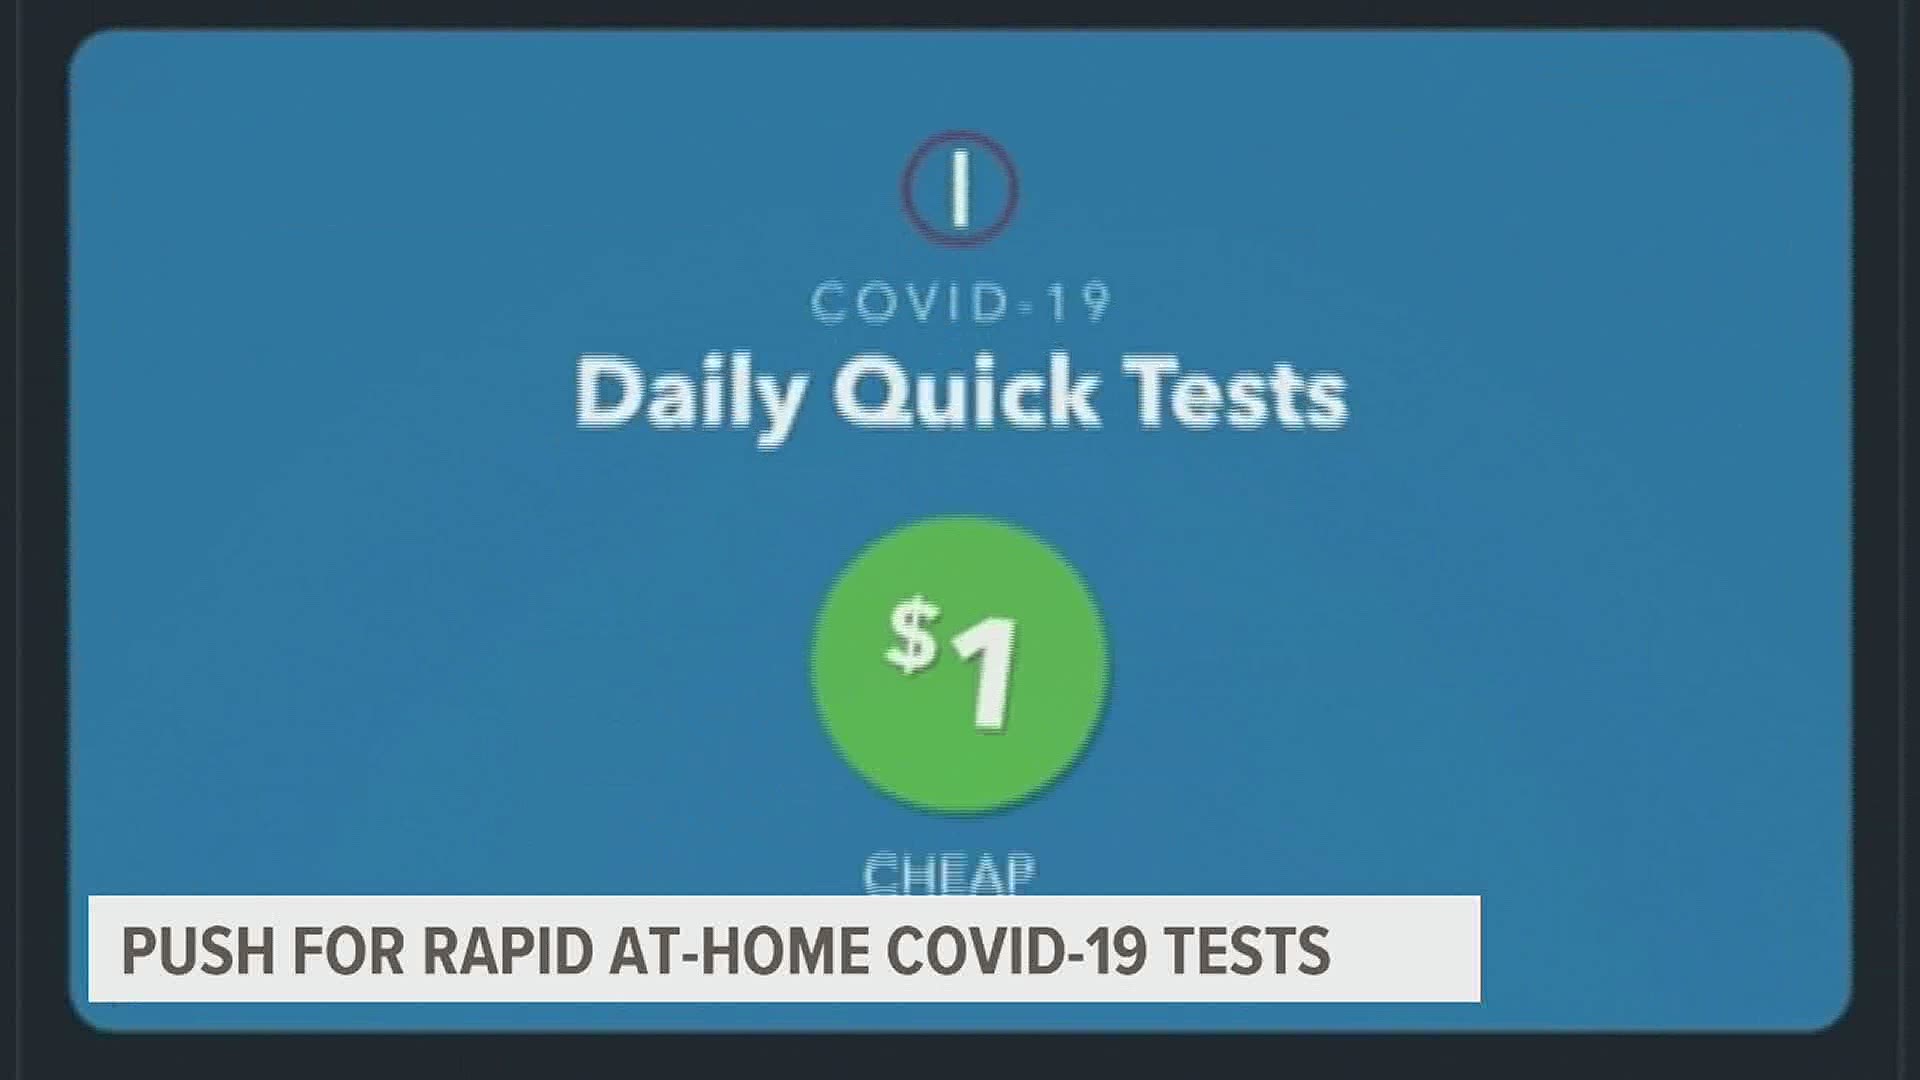 Some leading public health experts are urging federal regulators to approve at-home COVID-19 tests. The accuracy of these tests are at the core of the debate.